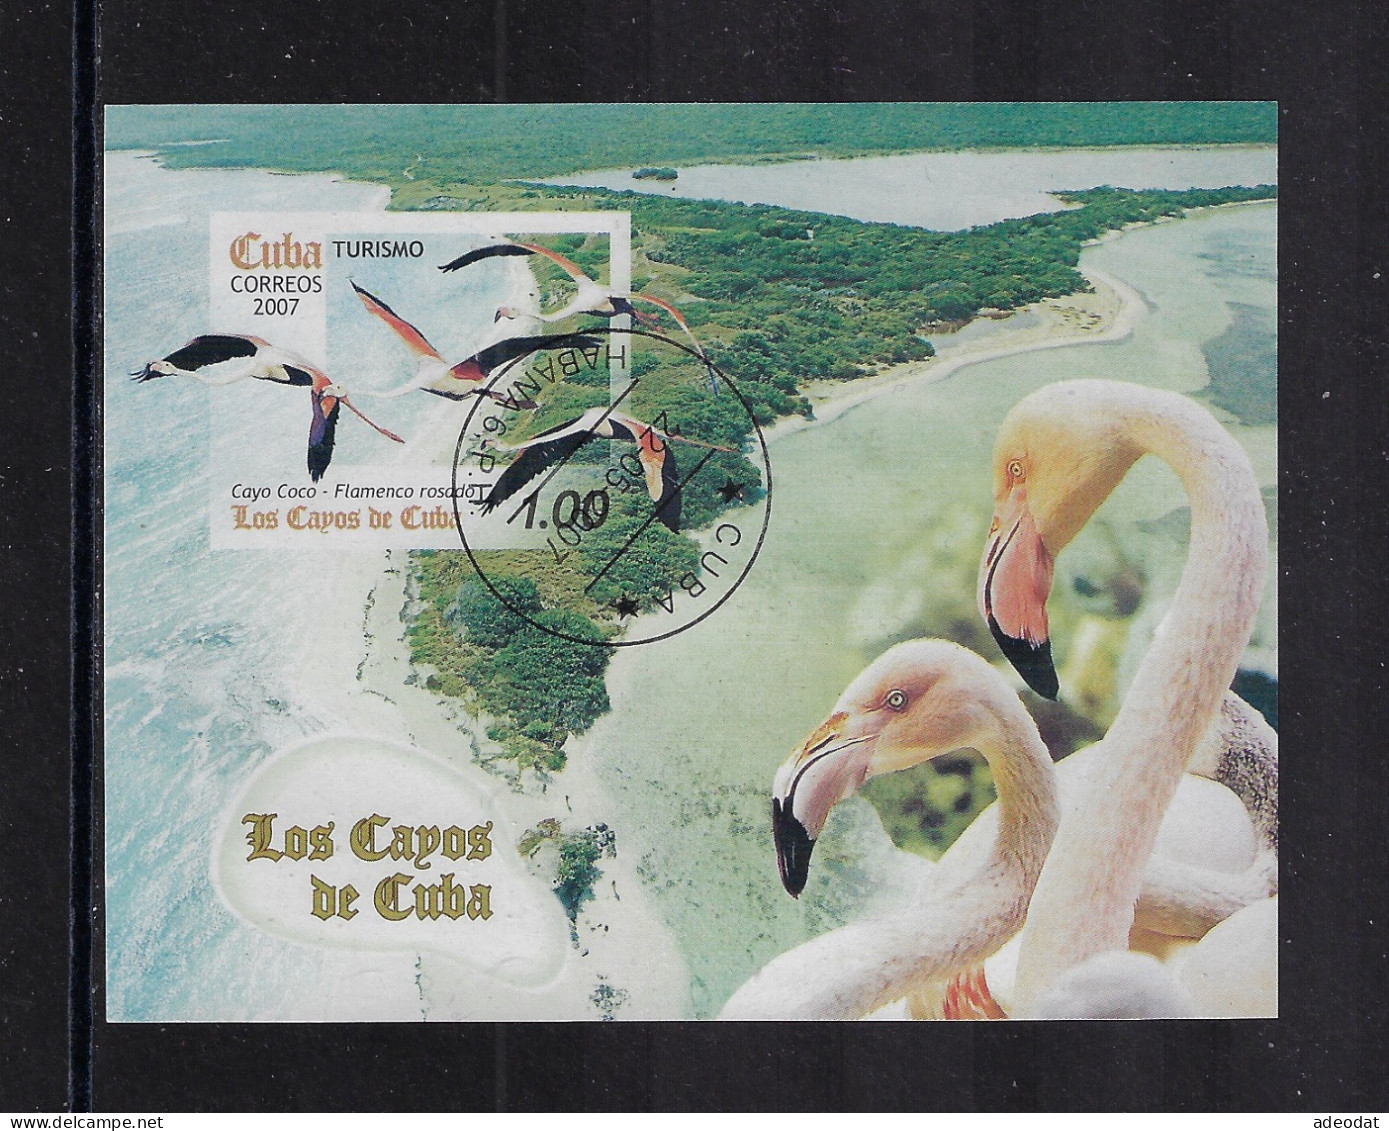 CUBA 2007 CAYO COCO, FLAMINGO SCOTT 4709 CANCELLED - Used Stamps